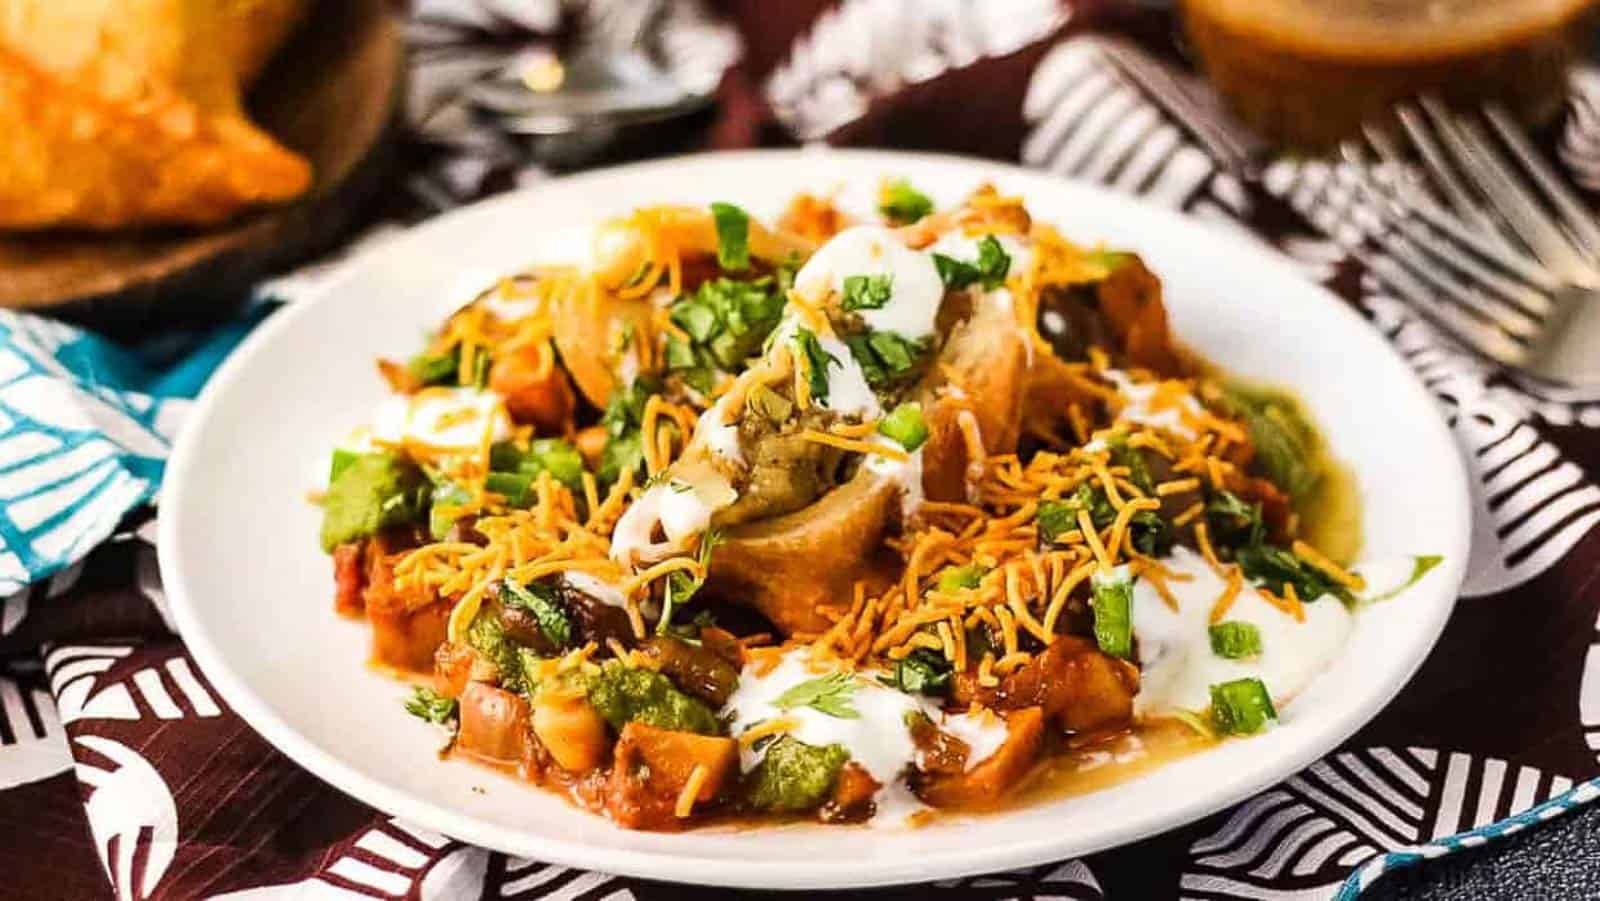 Samosa chaat on a white plate with a brown and white napkin underneat.